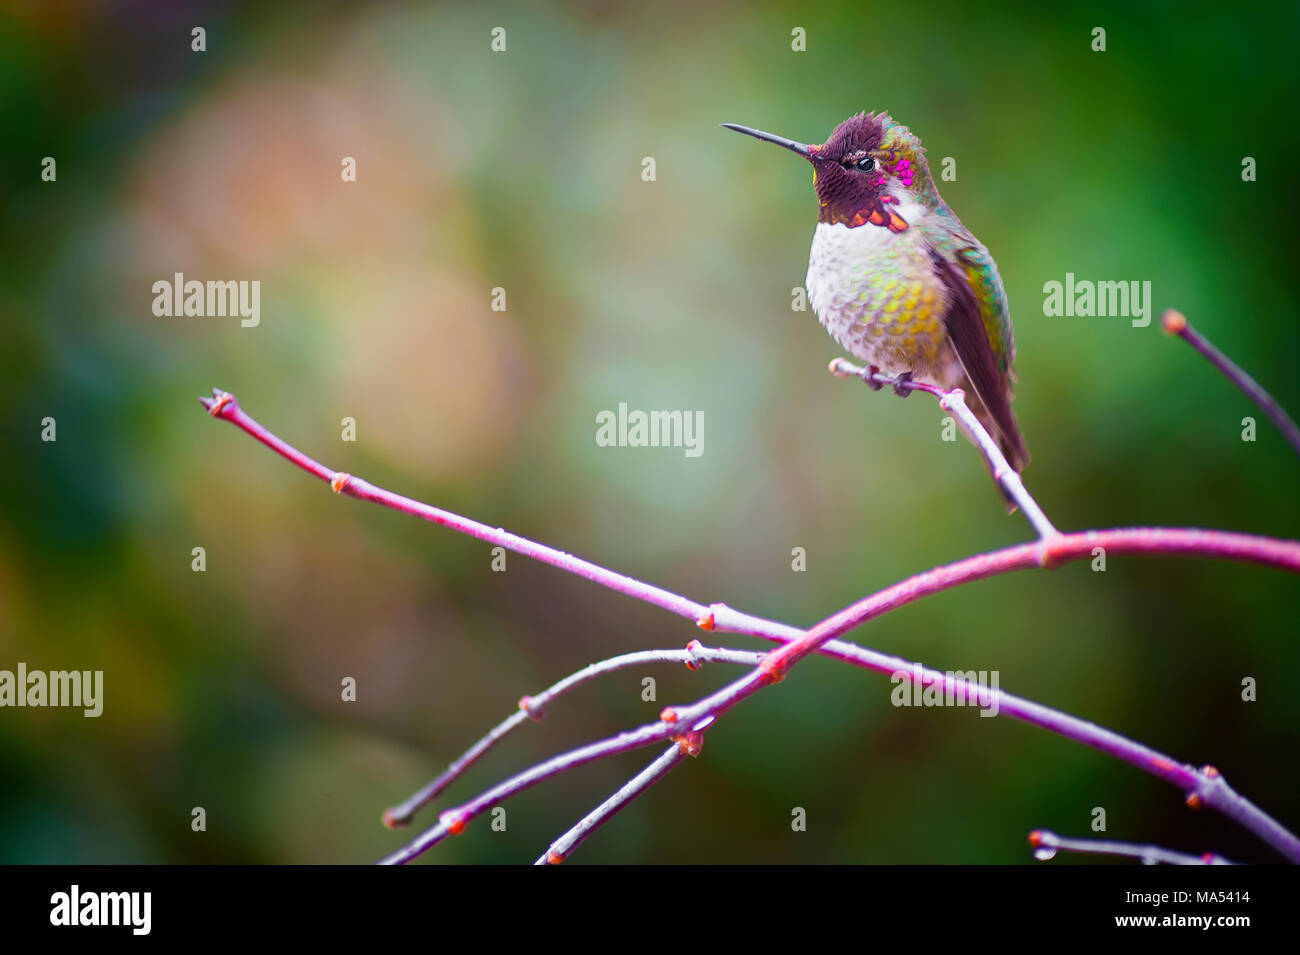 Closeup of a Anna's Hummingbird perched on a branch with copyspace. Stock Photo